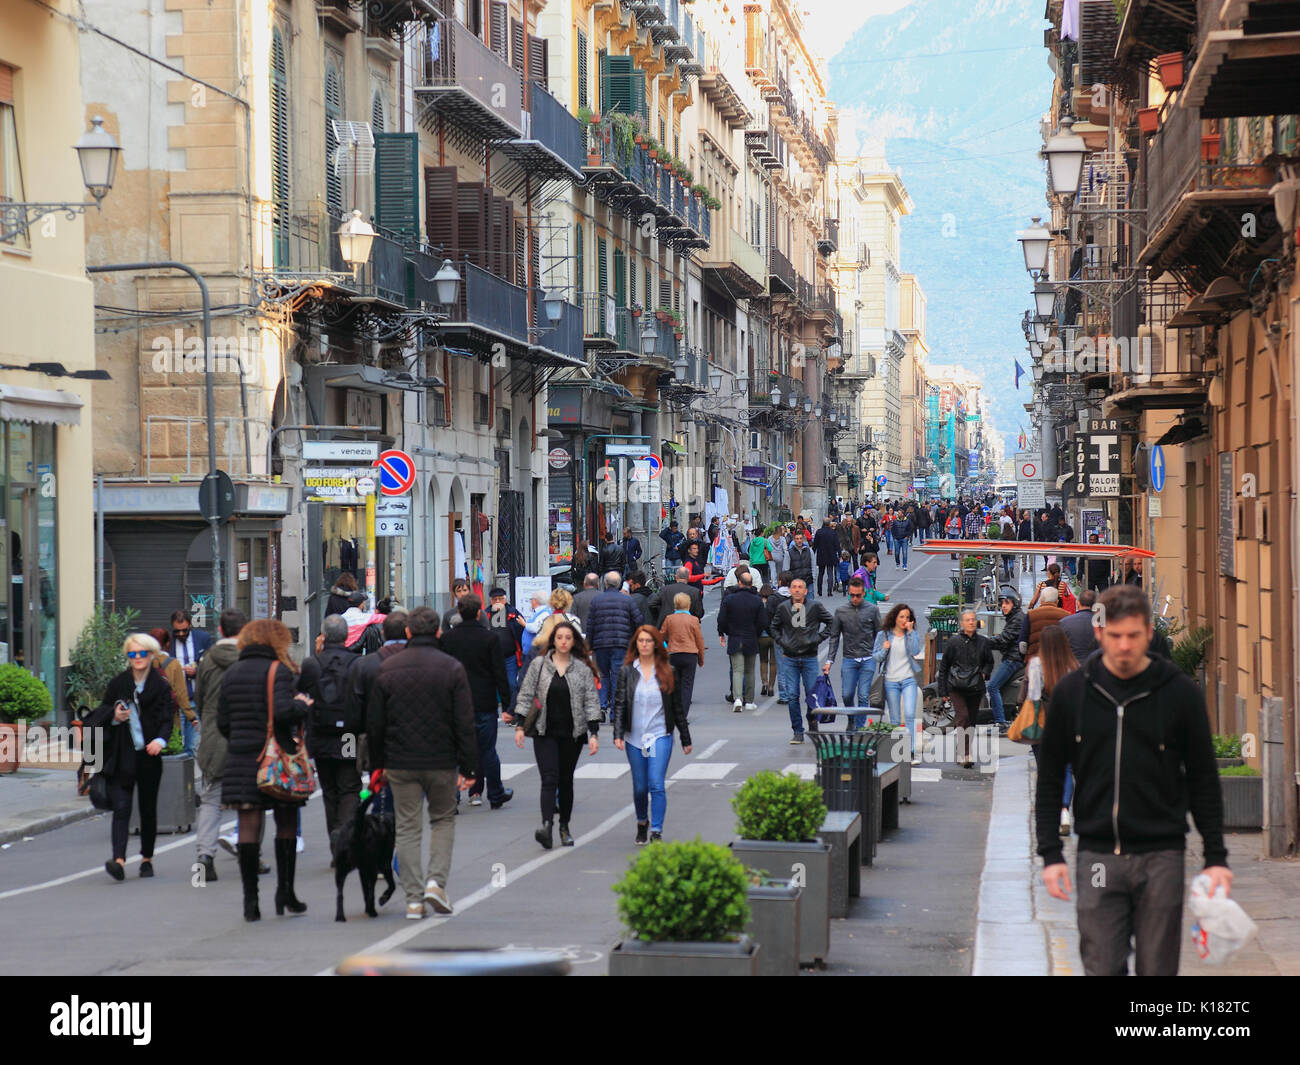 Sicily, pedestrian zone in the old town of Palermo, Via Maqueda Stock Photo